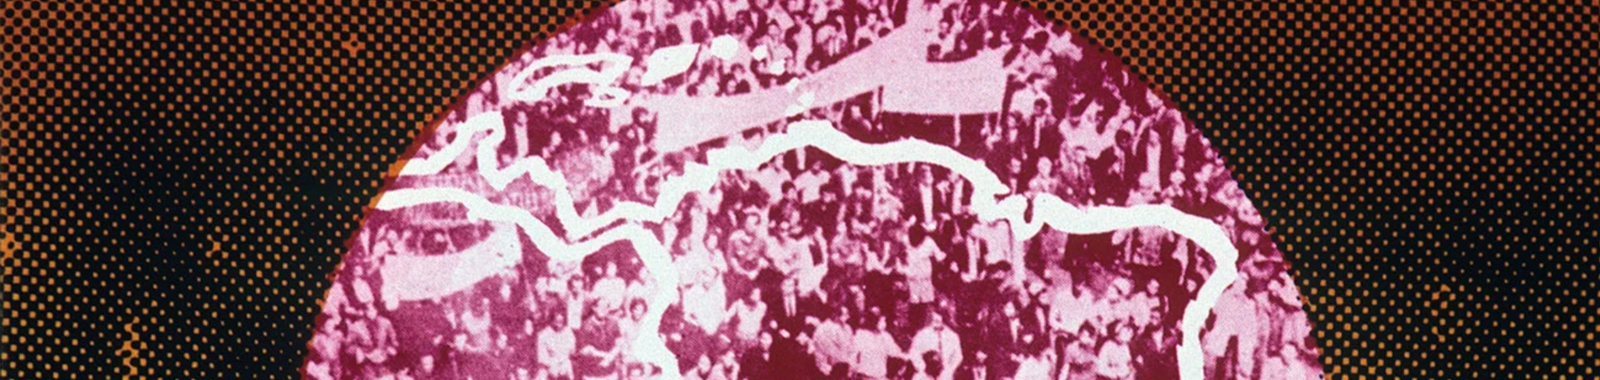 Detail from poster INT 376 issued by International Union of Students in 1972.